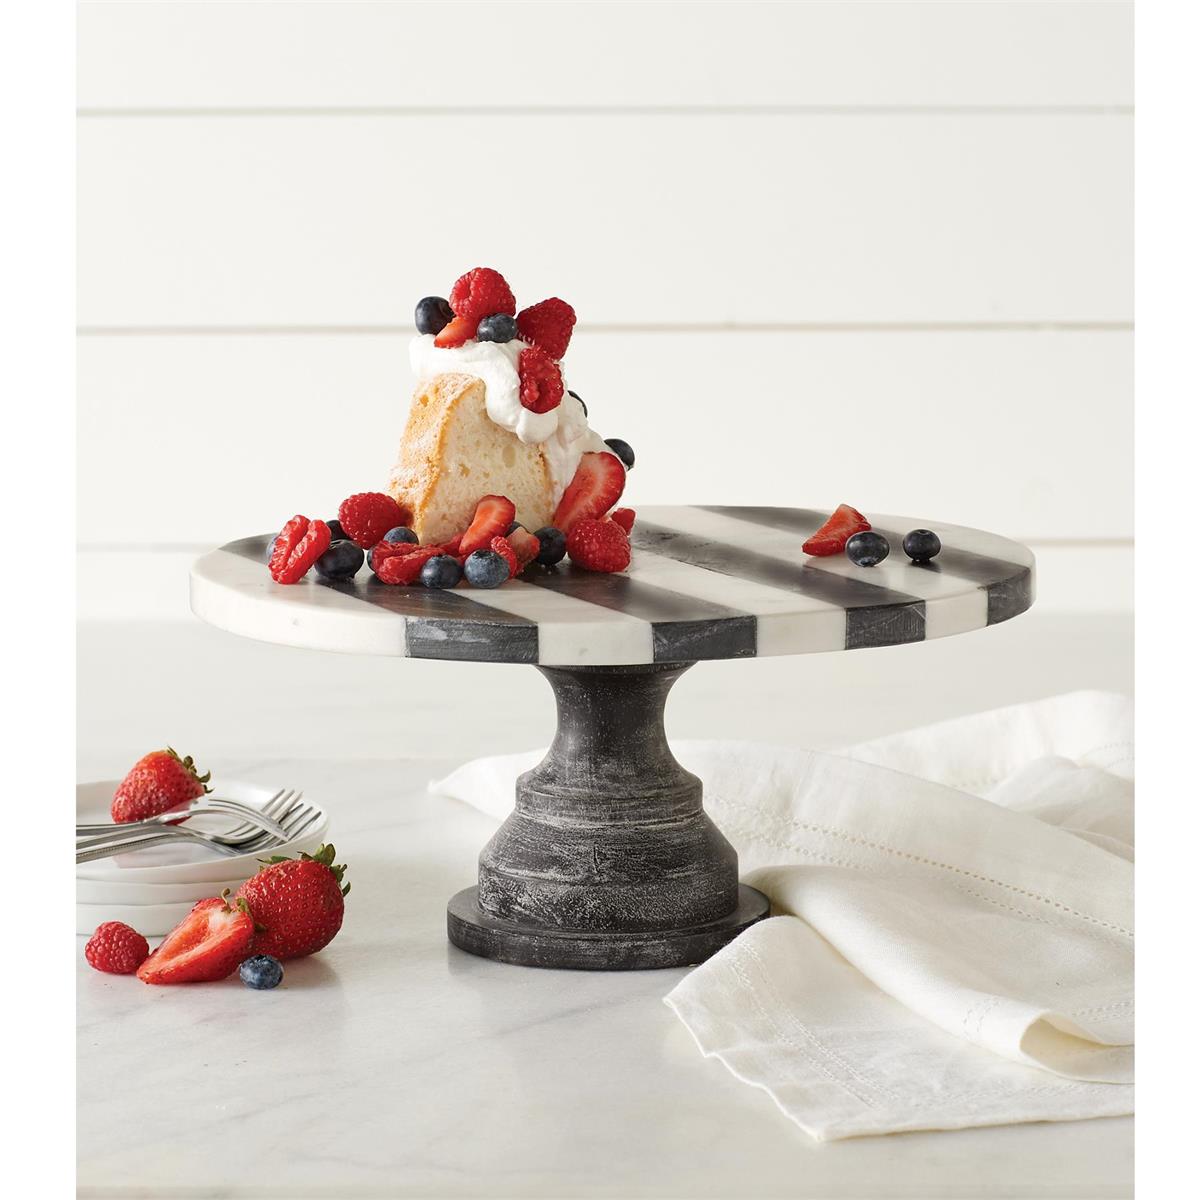 black and white stripped marble cake pedestal displayed with blueberries, strawberries, and slice of cake next to stacked plates and white napkins against a white backsplash in a kitchen